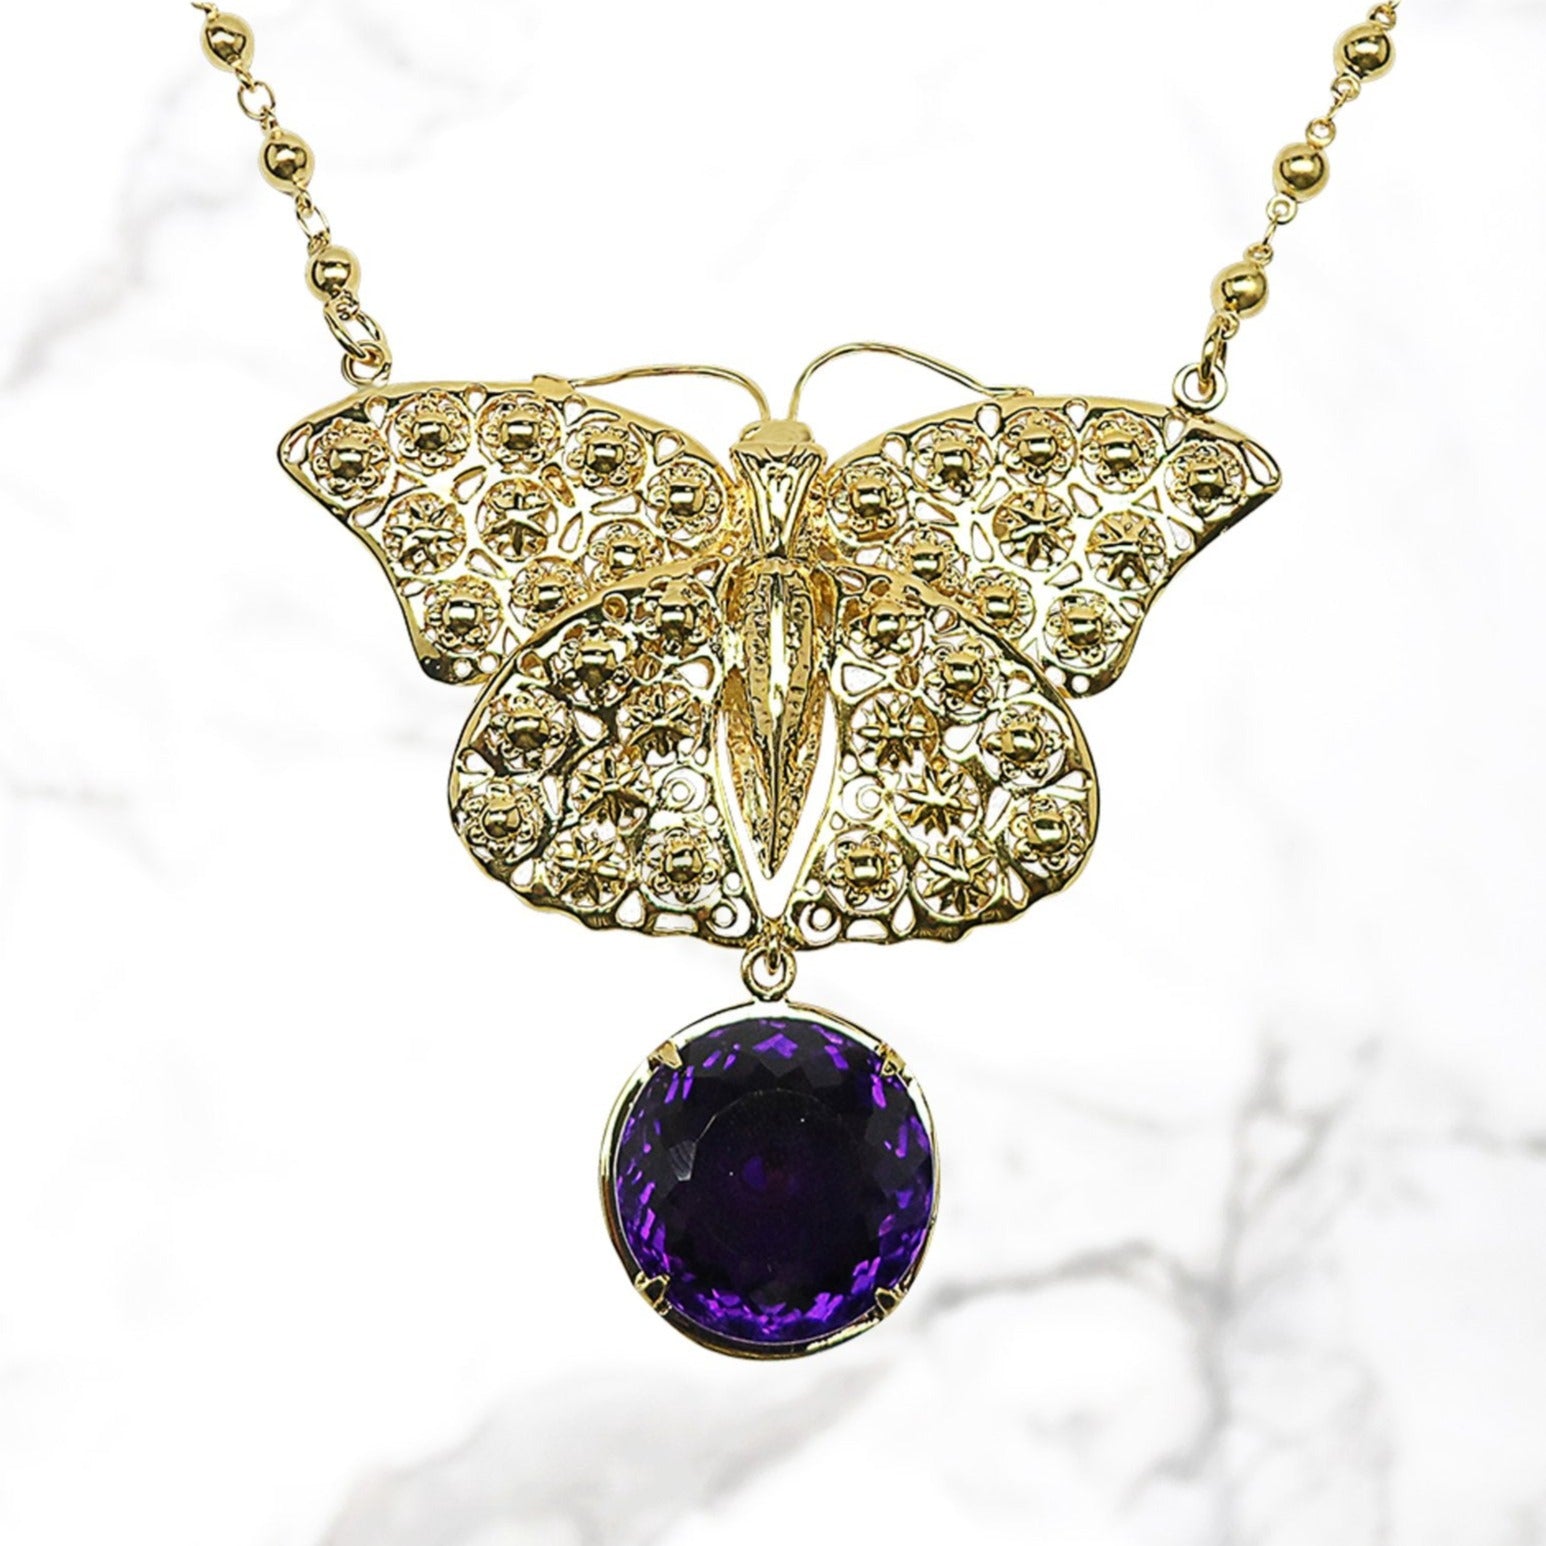 M2 gold butterfly necklace